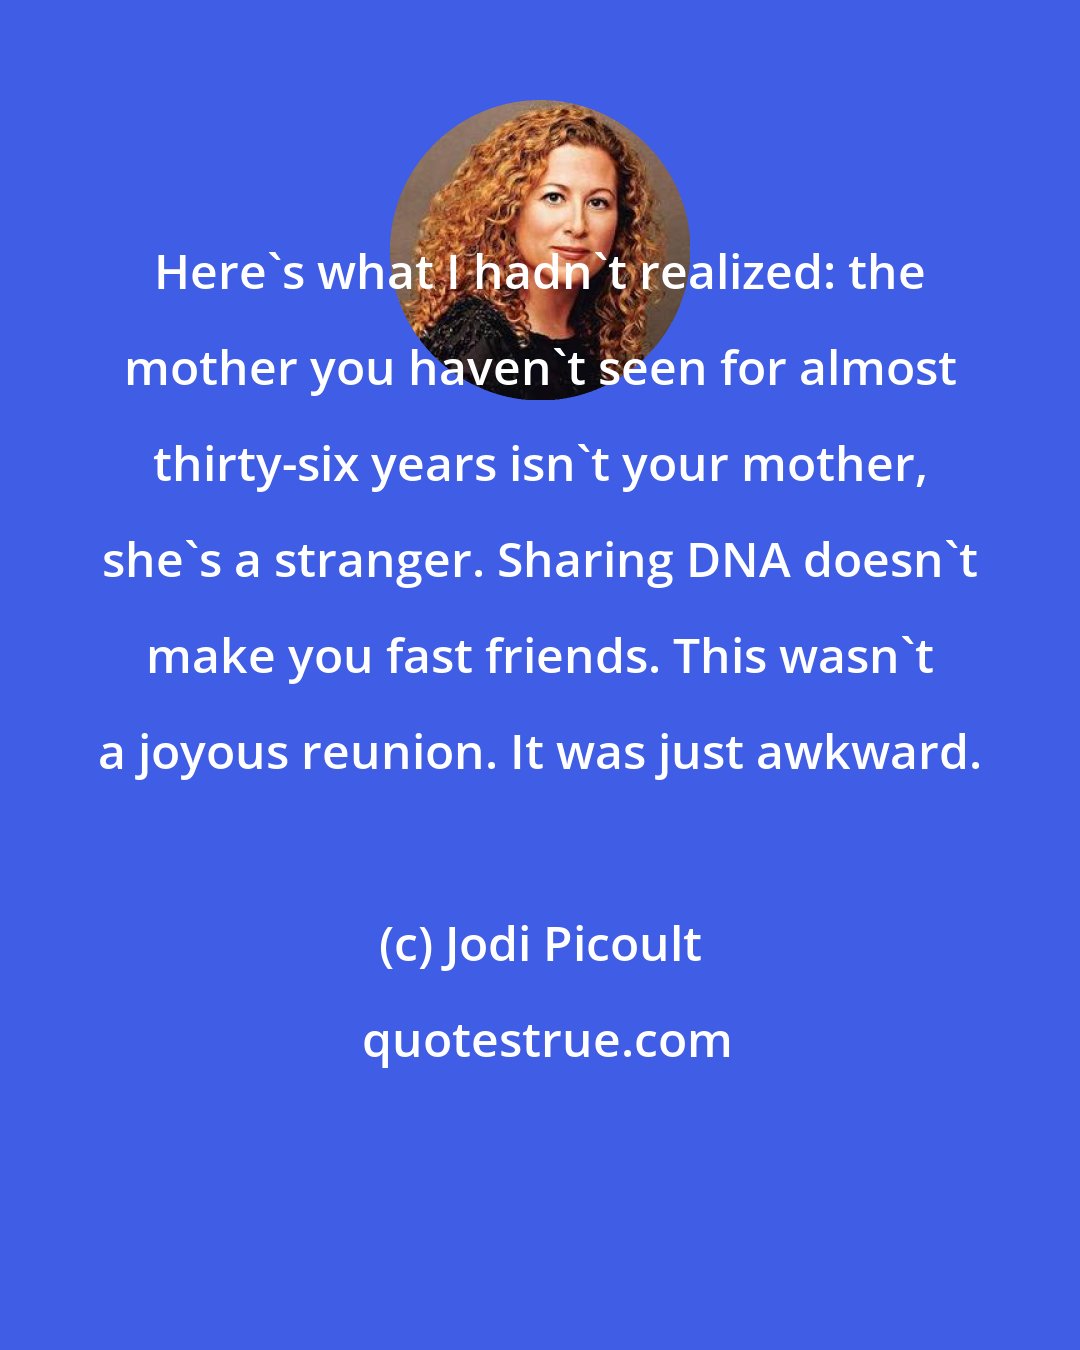 Jodi Picoult: Here's what I hadn't realized: the mother you haven't seen for almost thirty-six years isn't your mother, she's a stranger. Sharing DNA doesn't make you fast friends. This wasn't a joyous reunion. It was just awkward.